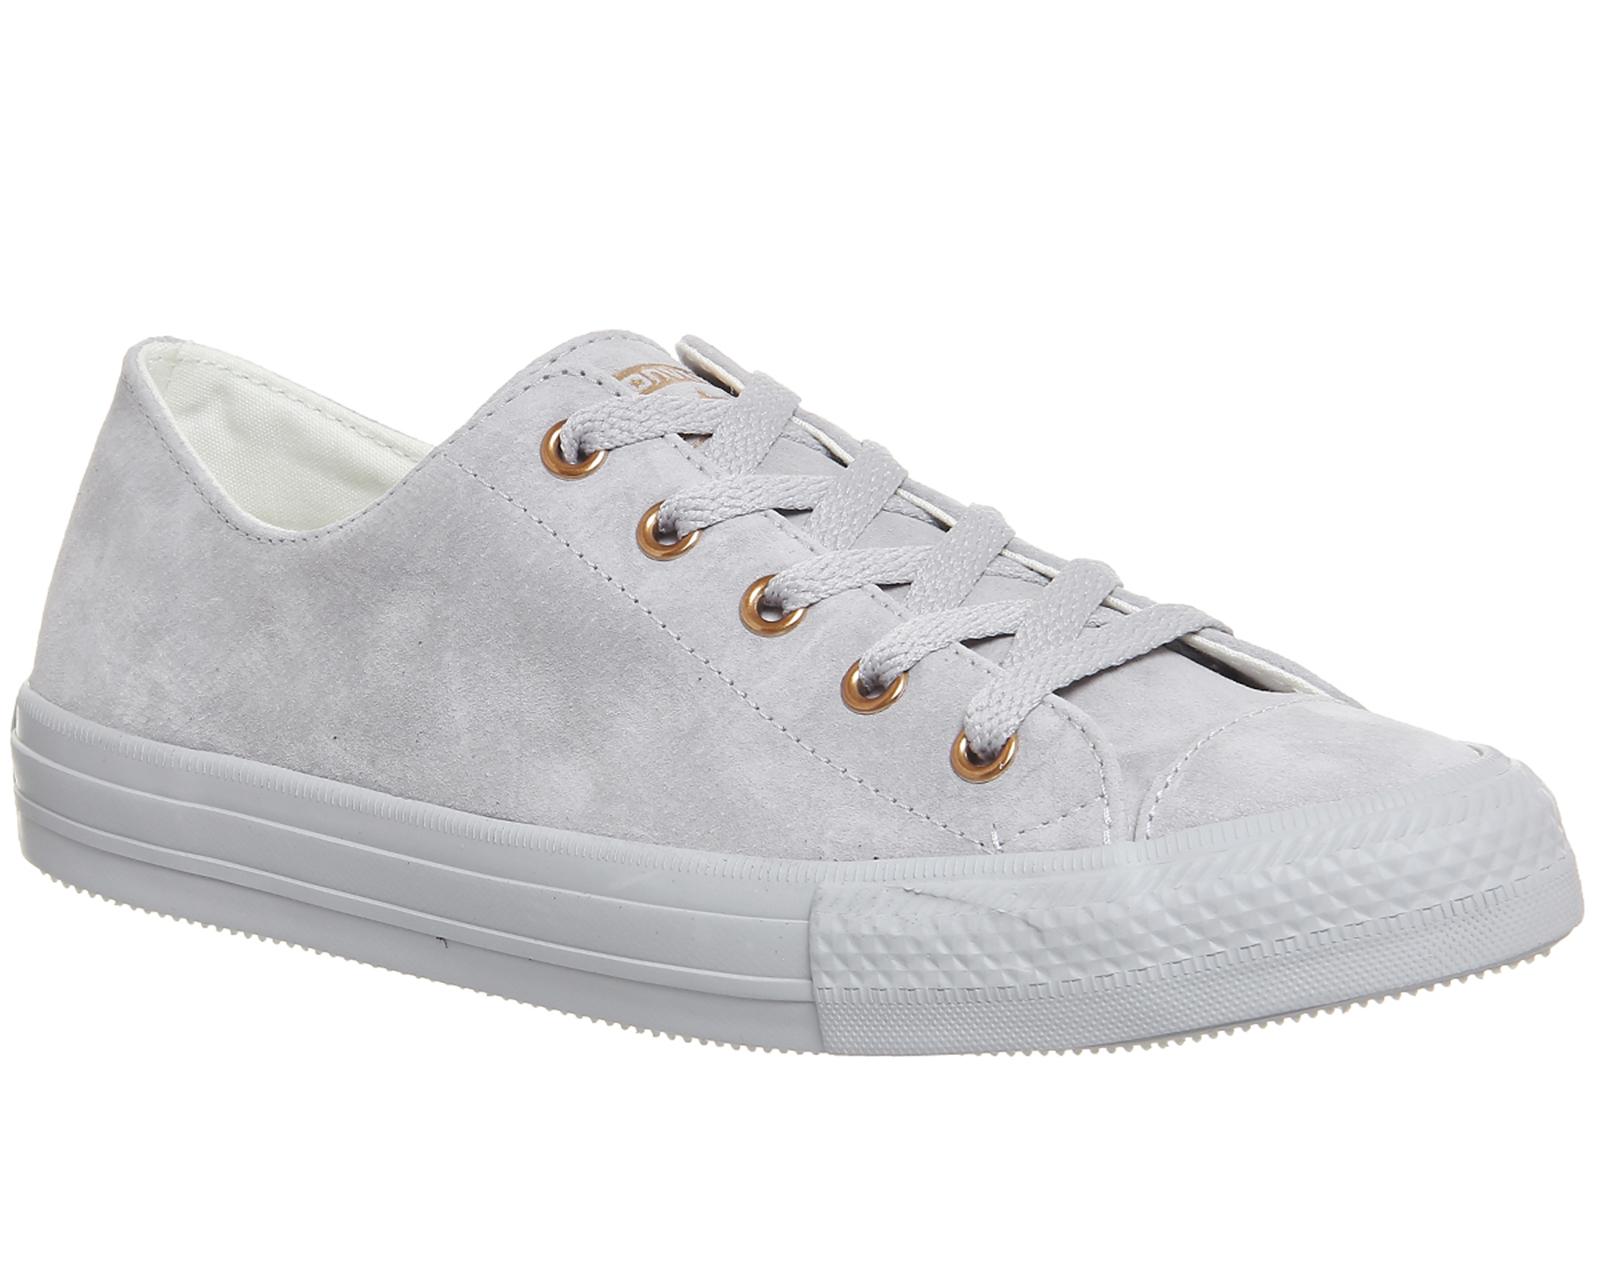 Converse Ctas Gemma Low Ash Grey Rose Gold - Hers trainers